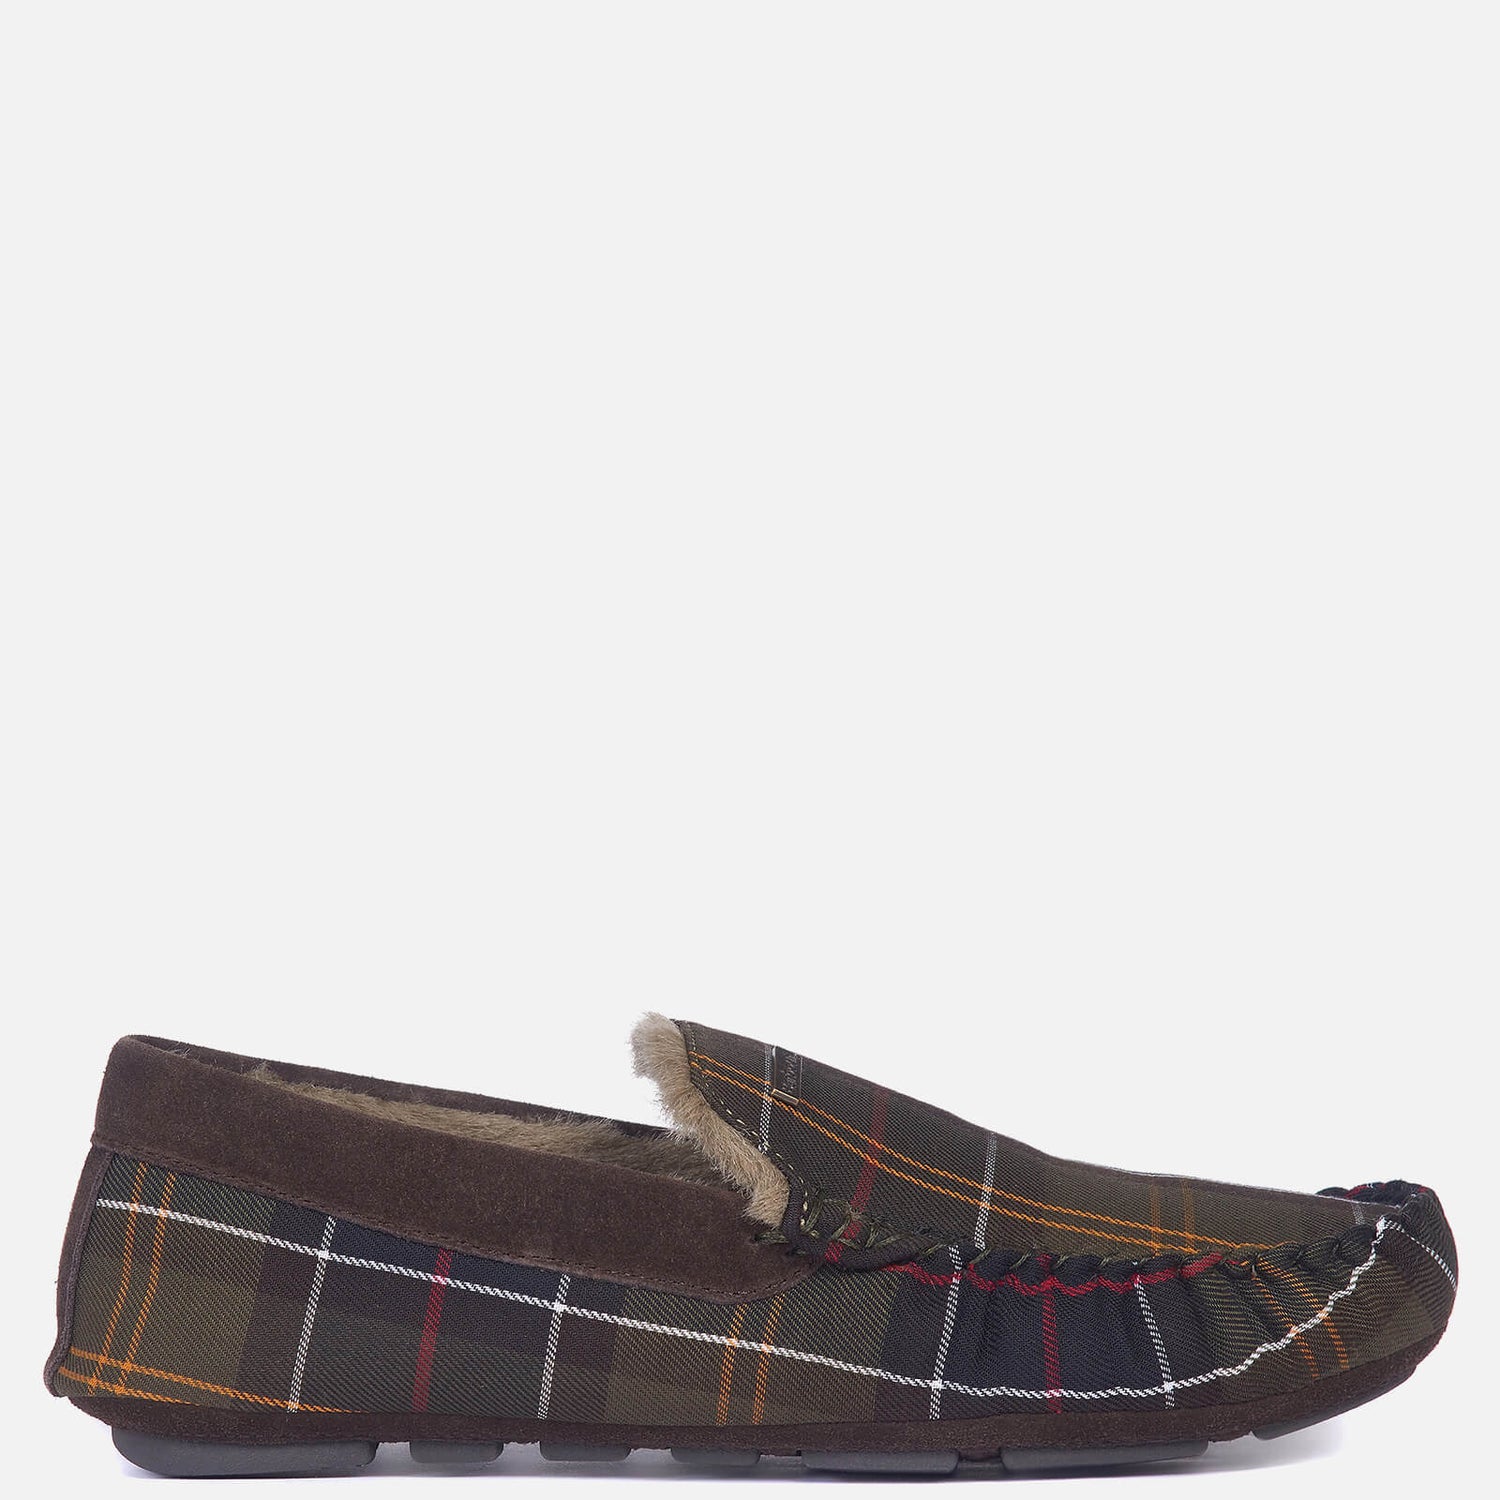 Barbour Men's Monty Moccasin Slippers - Recycled Classic Tartan - UK 7